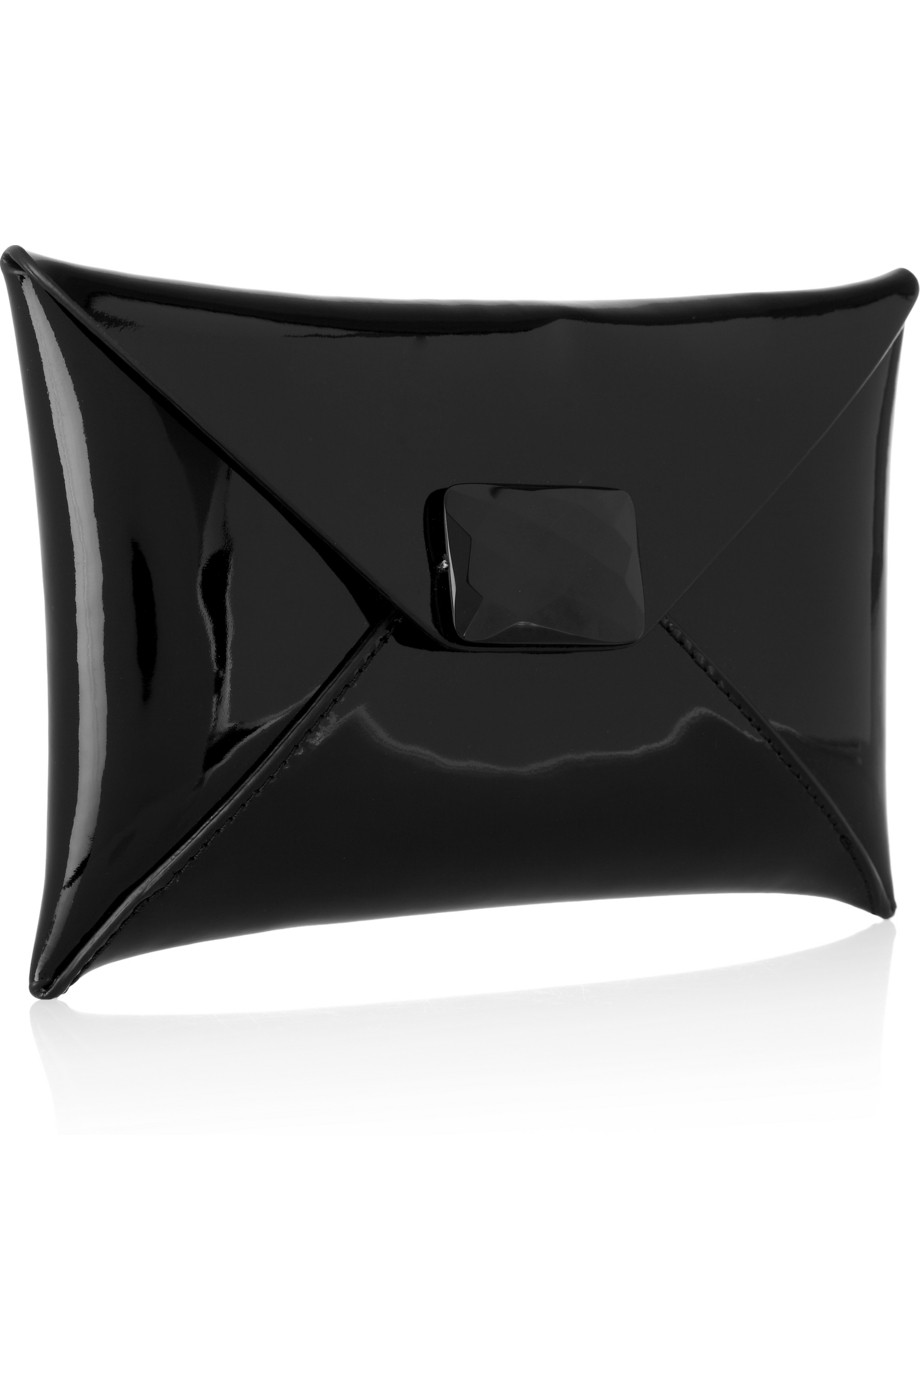 Anya Hindmarch Patent-leather Envelope Clutch in Black - Lyst